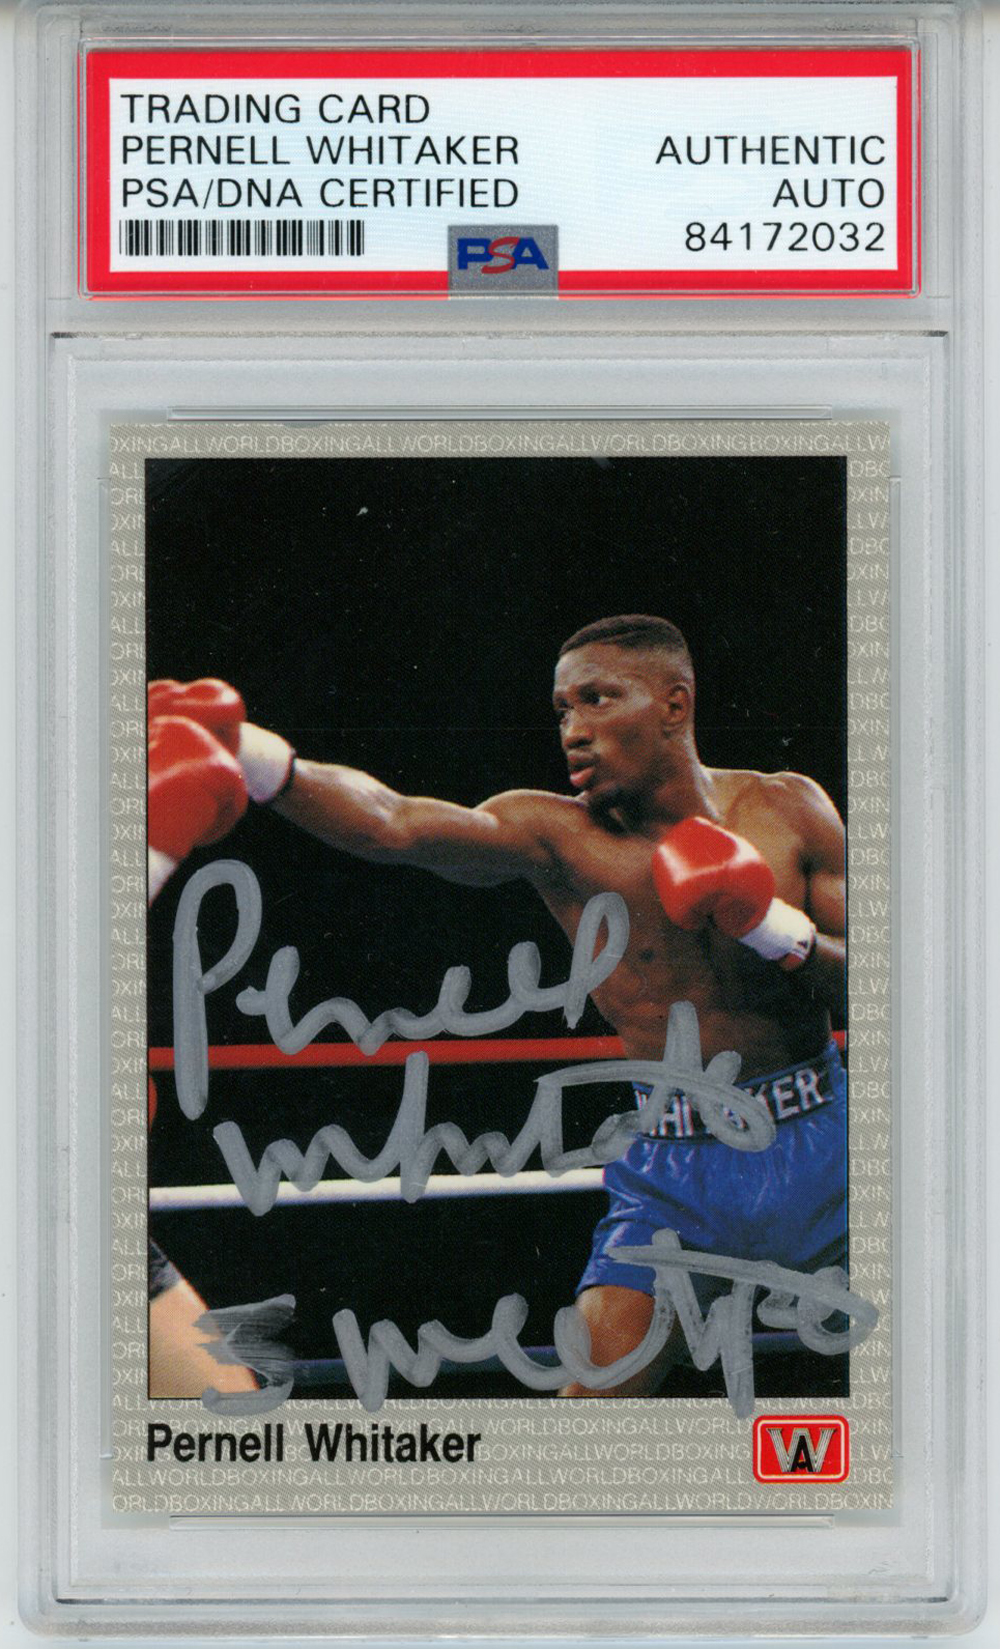 Pernell Whitaker Autographed 1991 AW Sports #11 Trading Card PSA Slab 32626